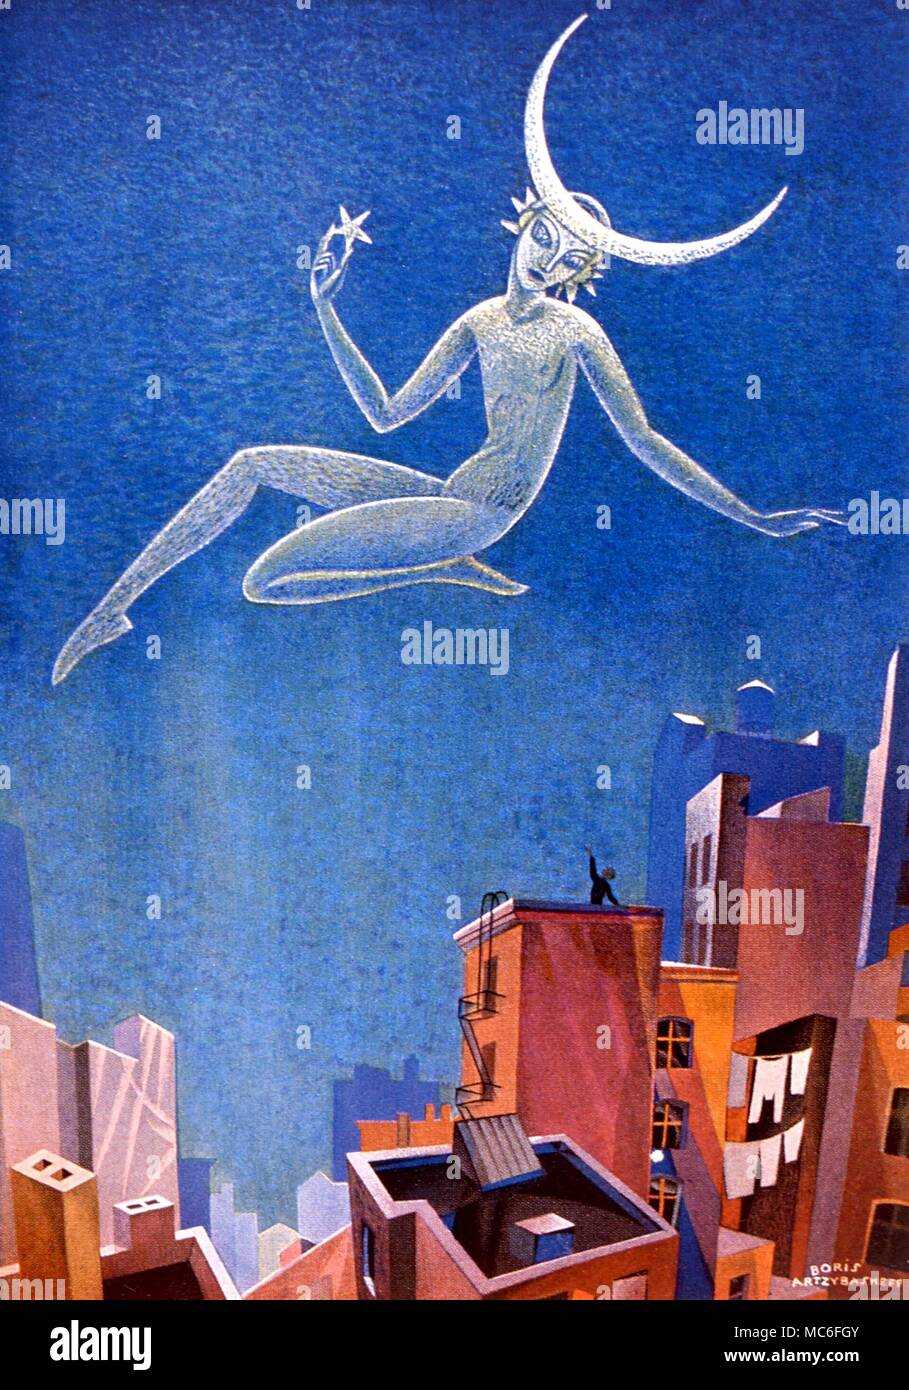 The Moon Personification of the Moon, from Alfred Creymborg's 'Funnybone Alley', 1927, p;ainted by Artzybasheff. 'I'd be very lonely sitting up here all alone/If it weren't for the creatures who can hear the moan I moan Stock Photo